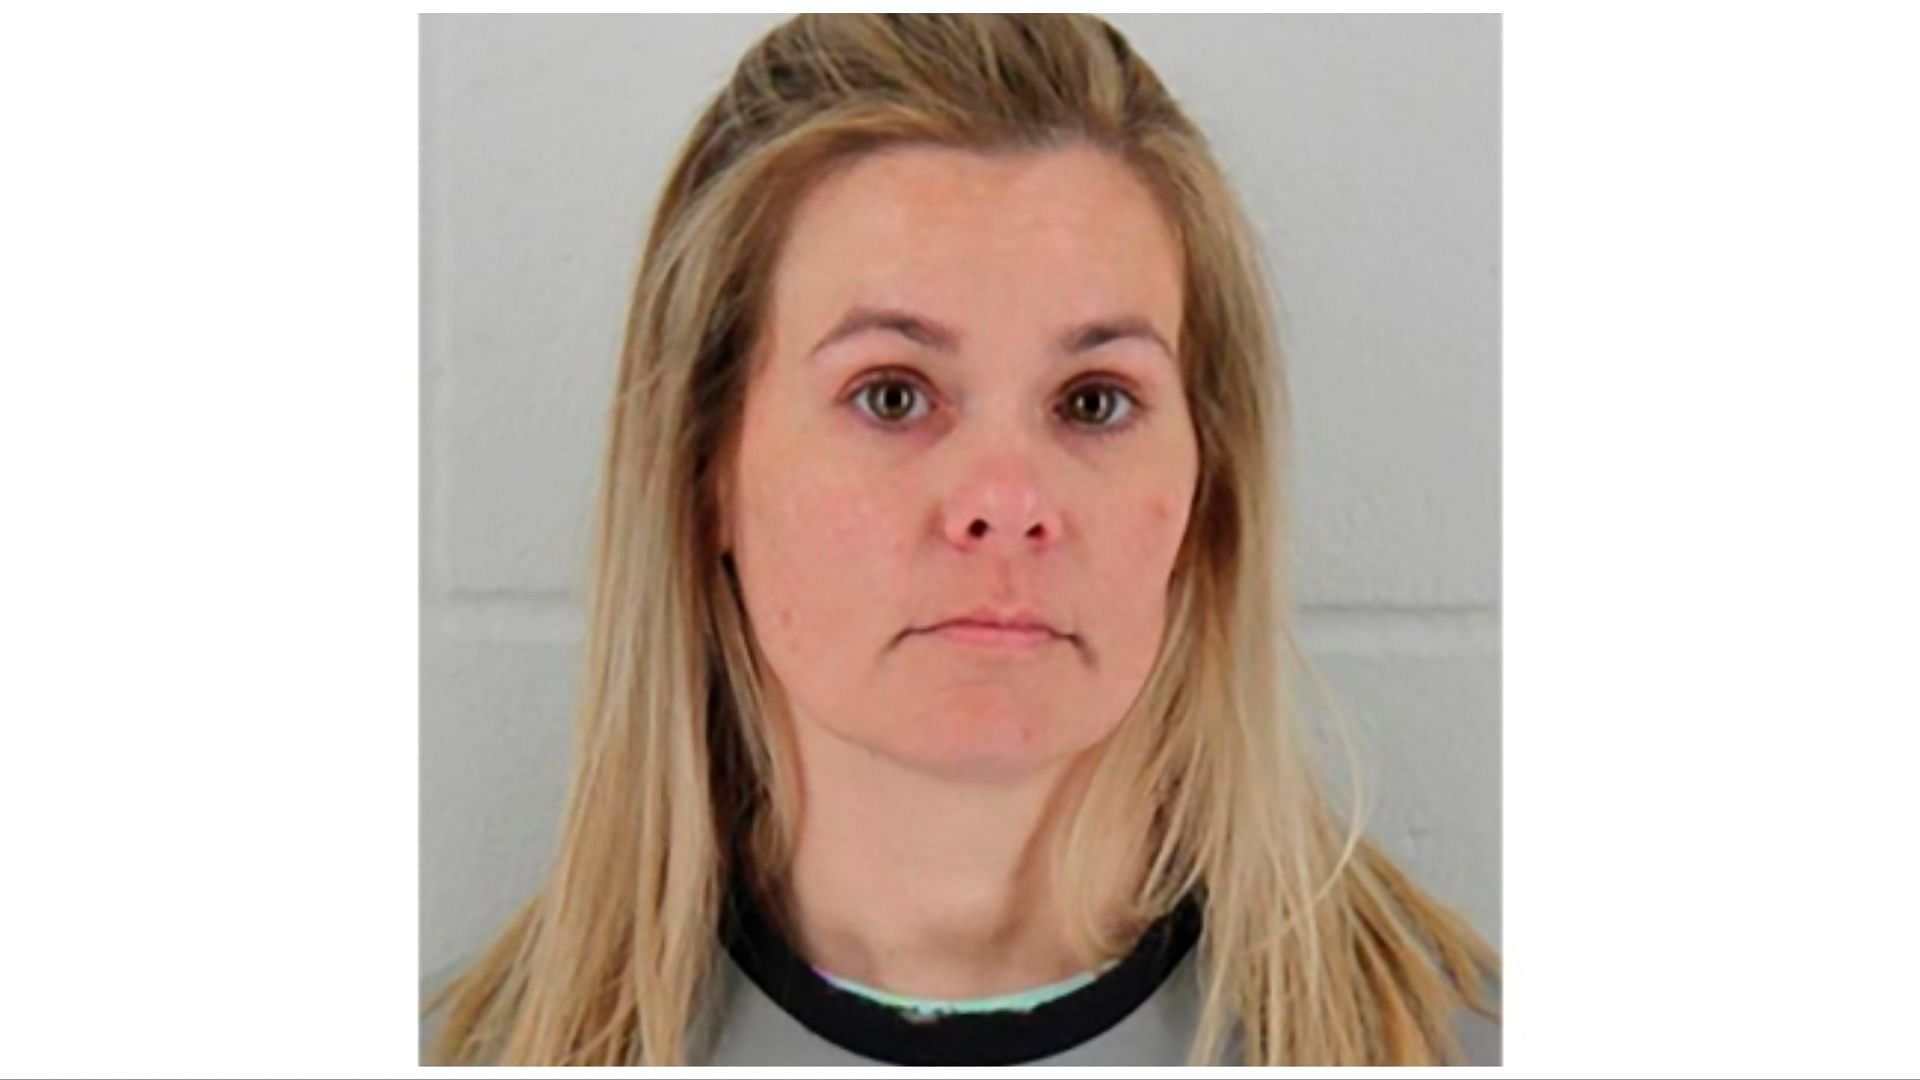 Jennifer Anne Hall has pleaded guilty in connection to patients murders, (Image via Jonathan Lewis Ketz/Twitter)